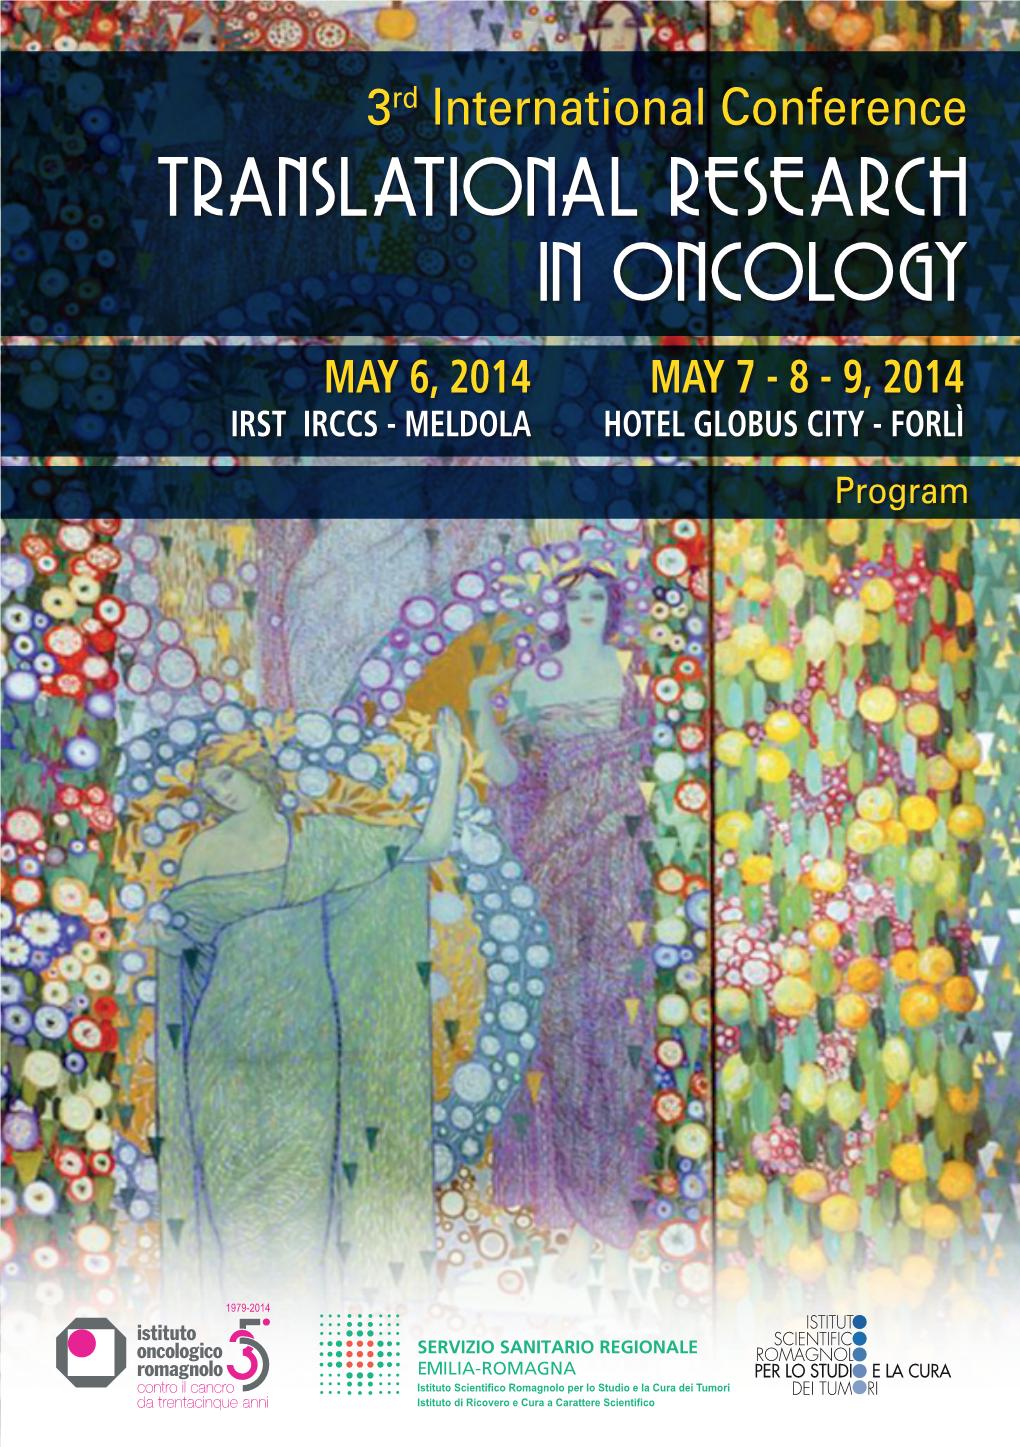 Translational Research in Oncology May 6, 2014 May 7 - 8 - 9, 2014 Irst IRCCS - Meldola Hotel Globus City - Forlì Program